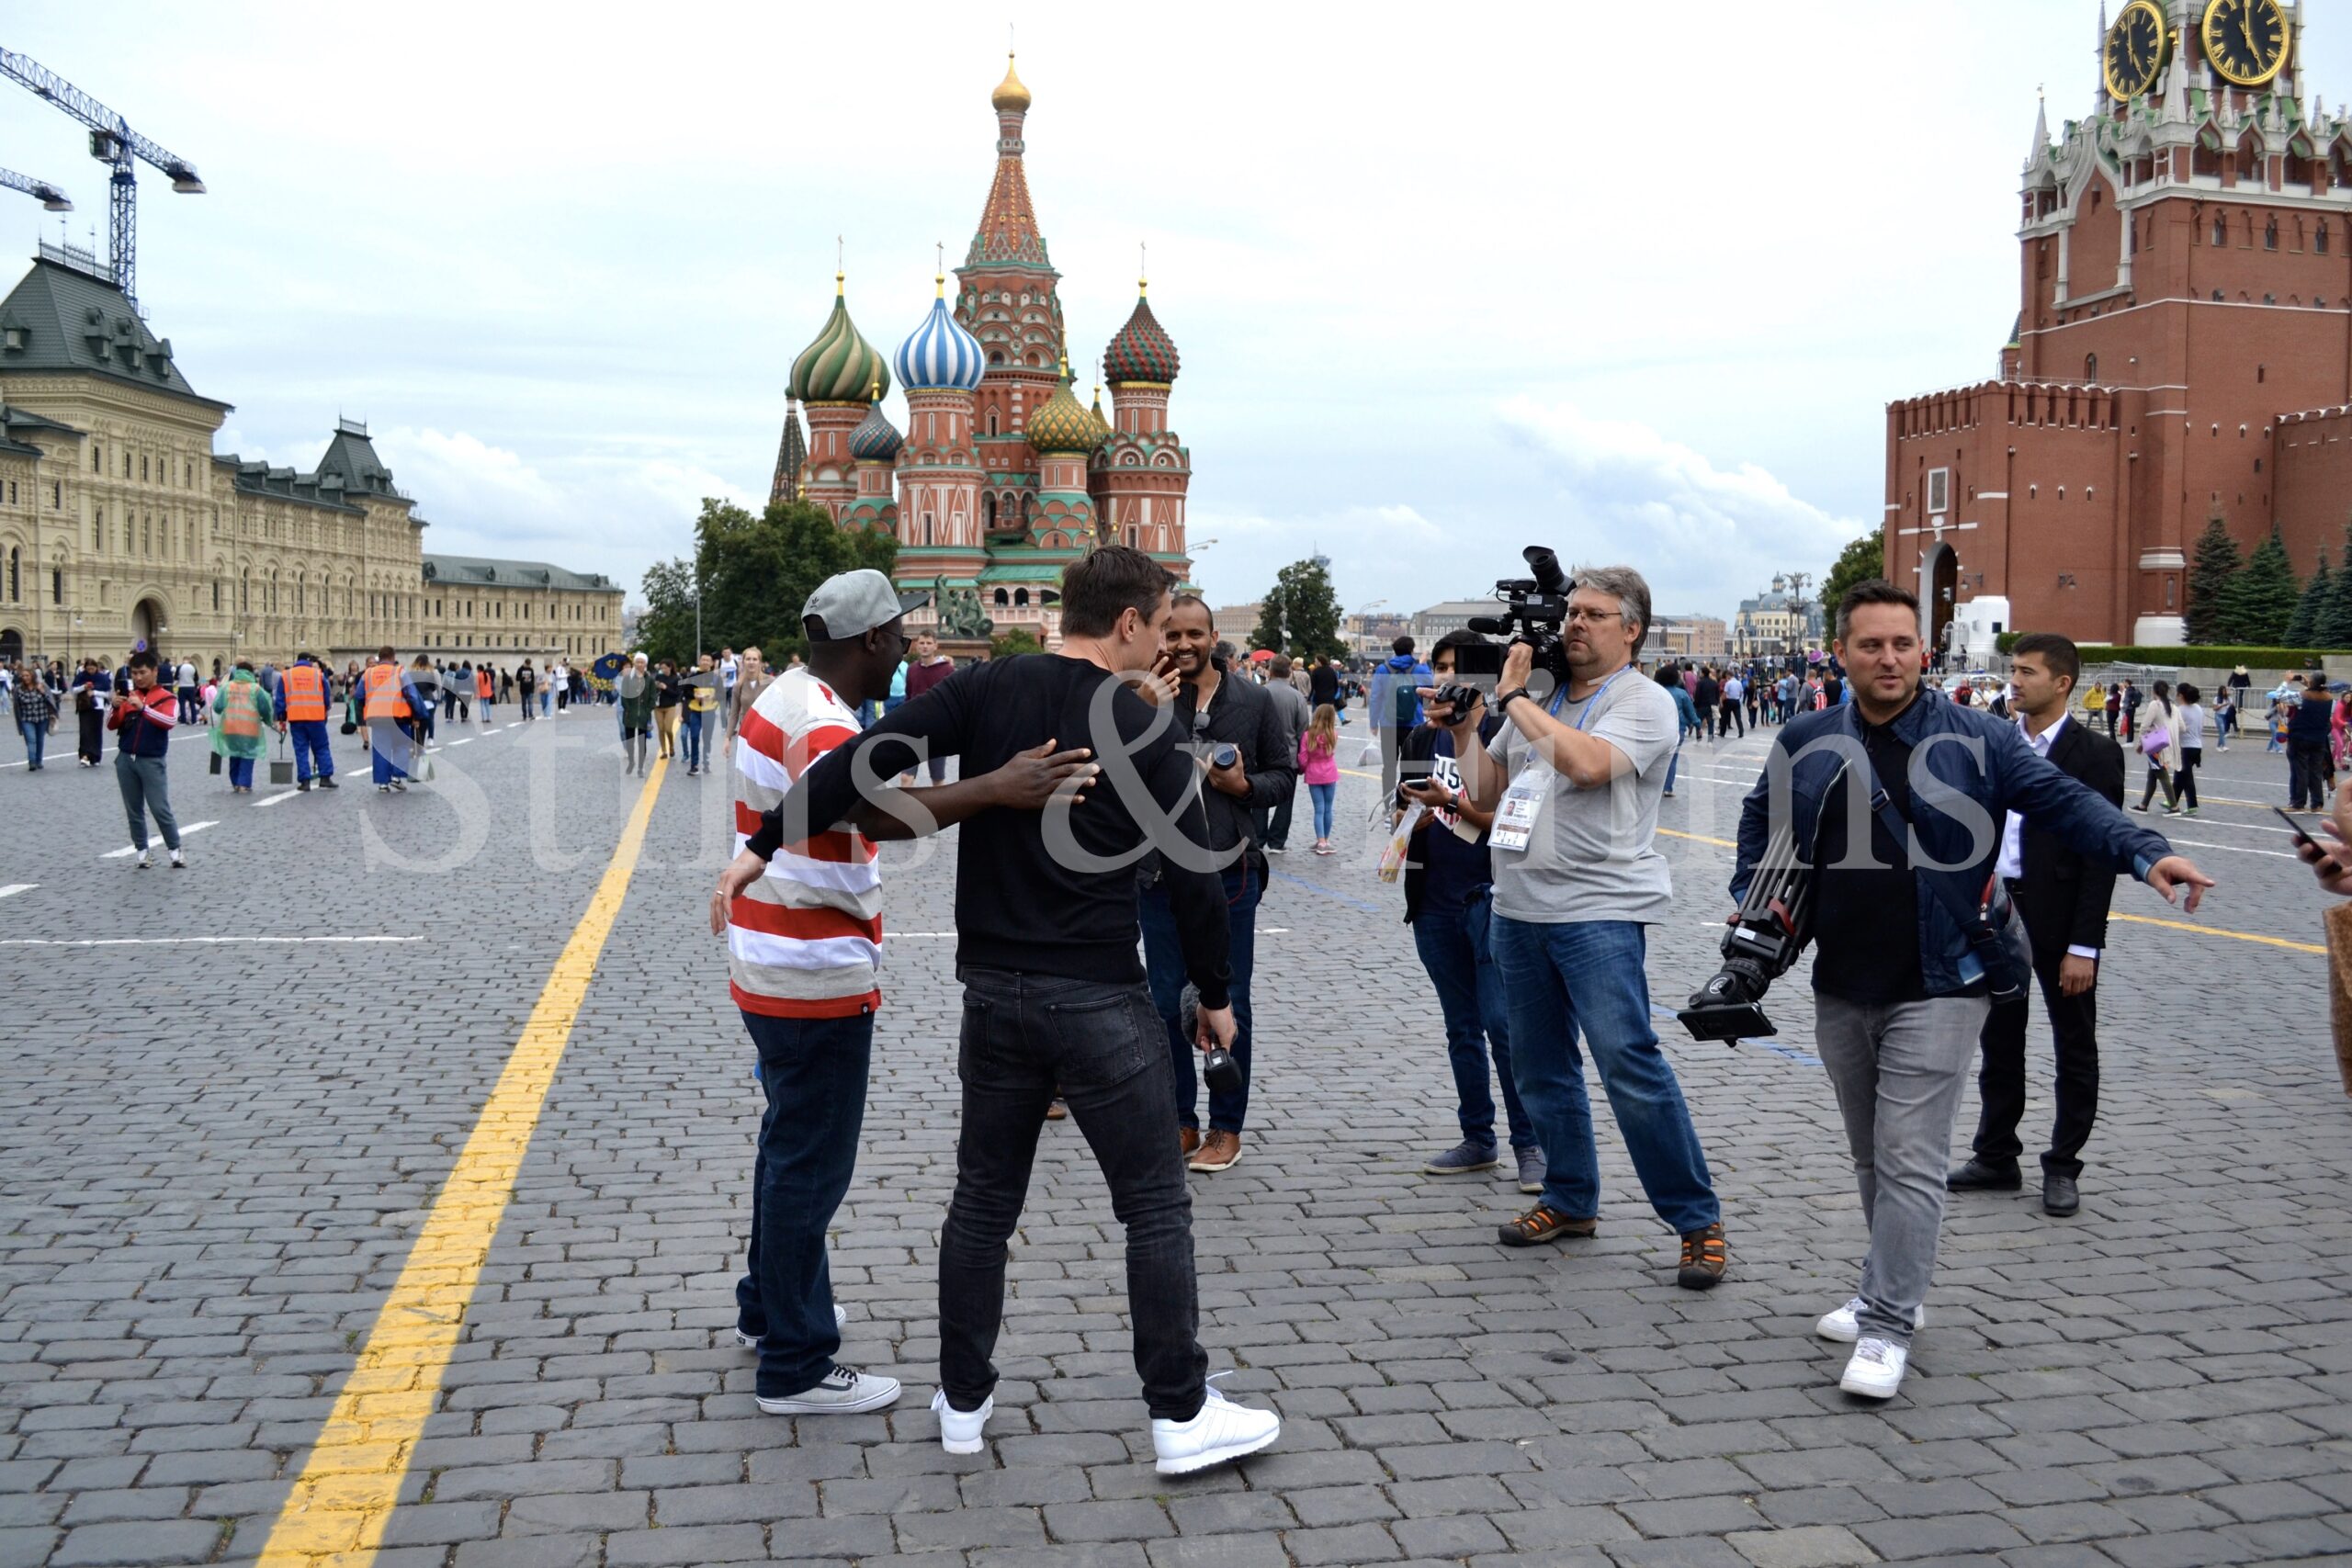 Our Moscow video crew filmed at the Red Square with soccer player Gary Neville during the World Cup 2018